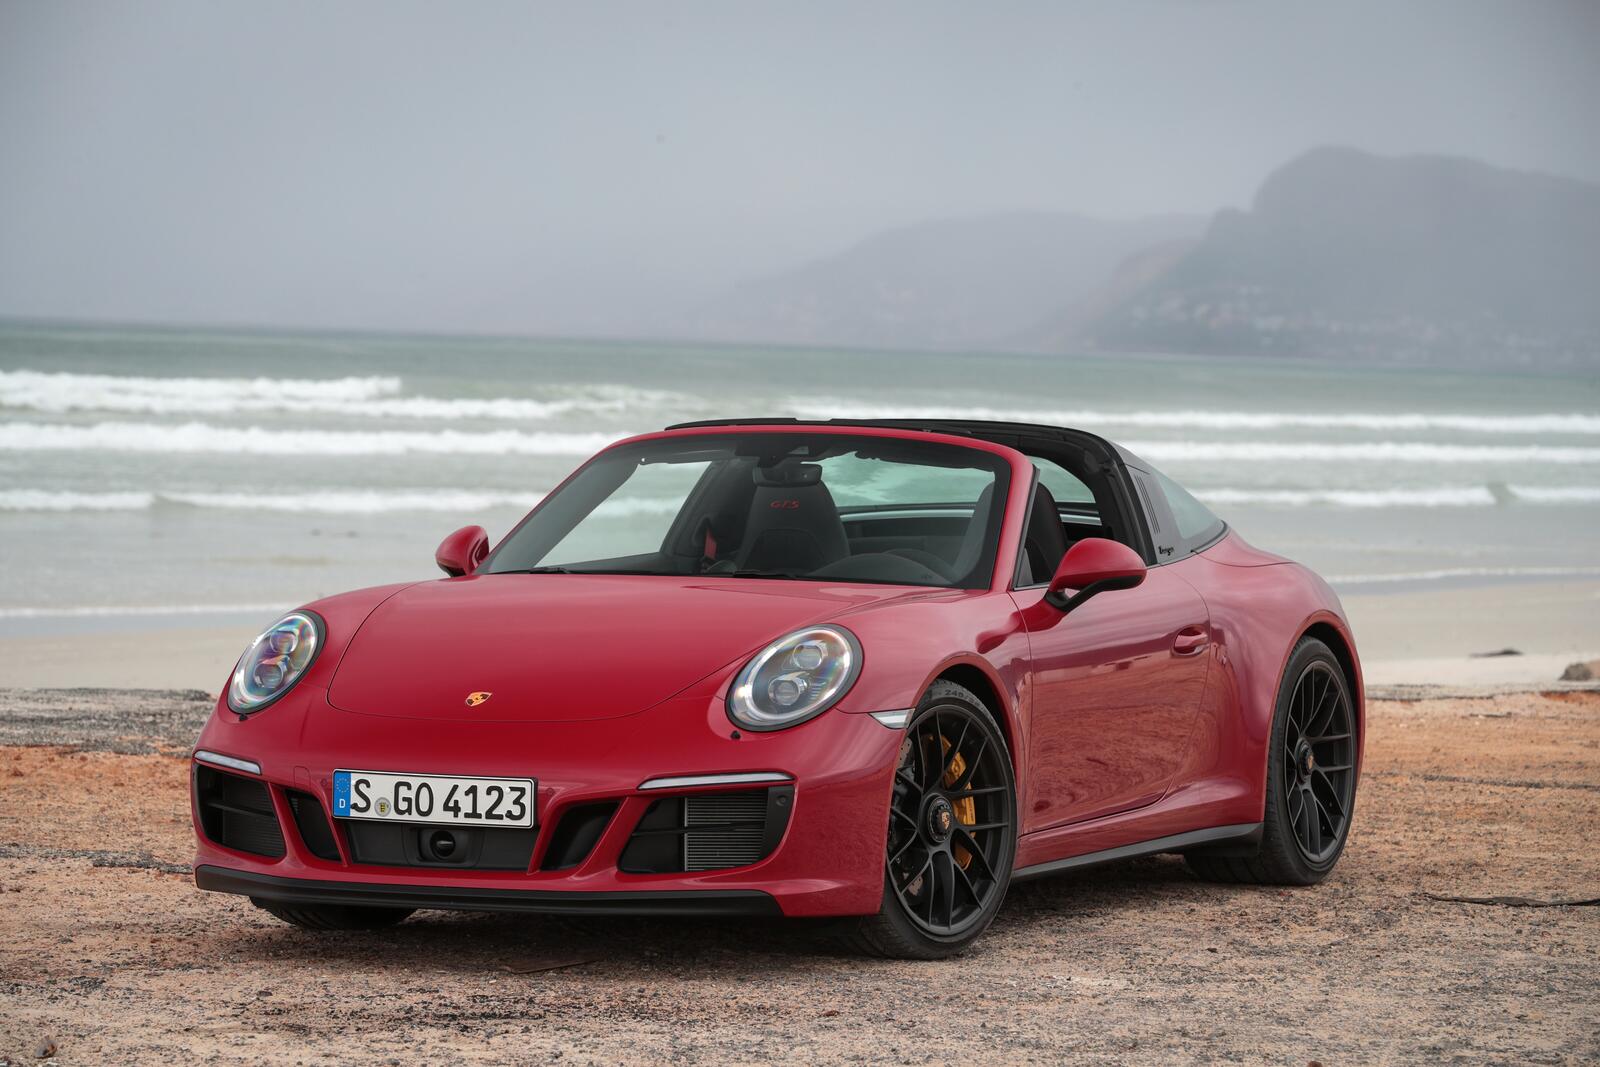 Free photo A red porsche 911 targa stands on a beach by the sea